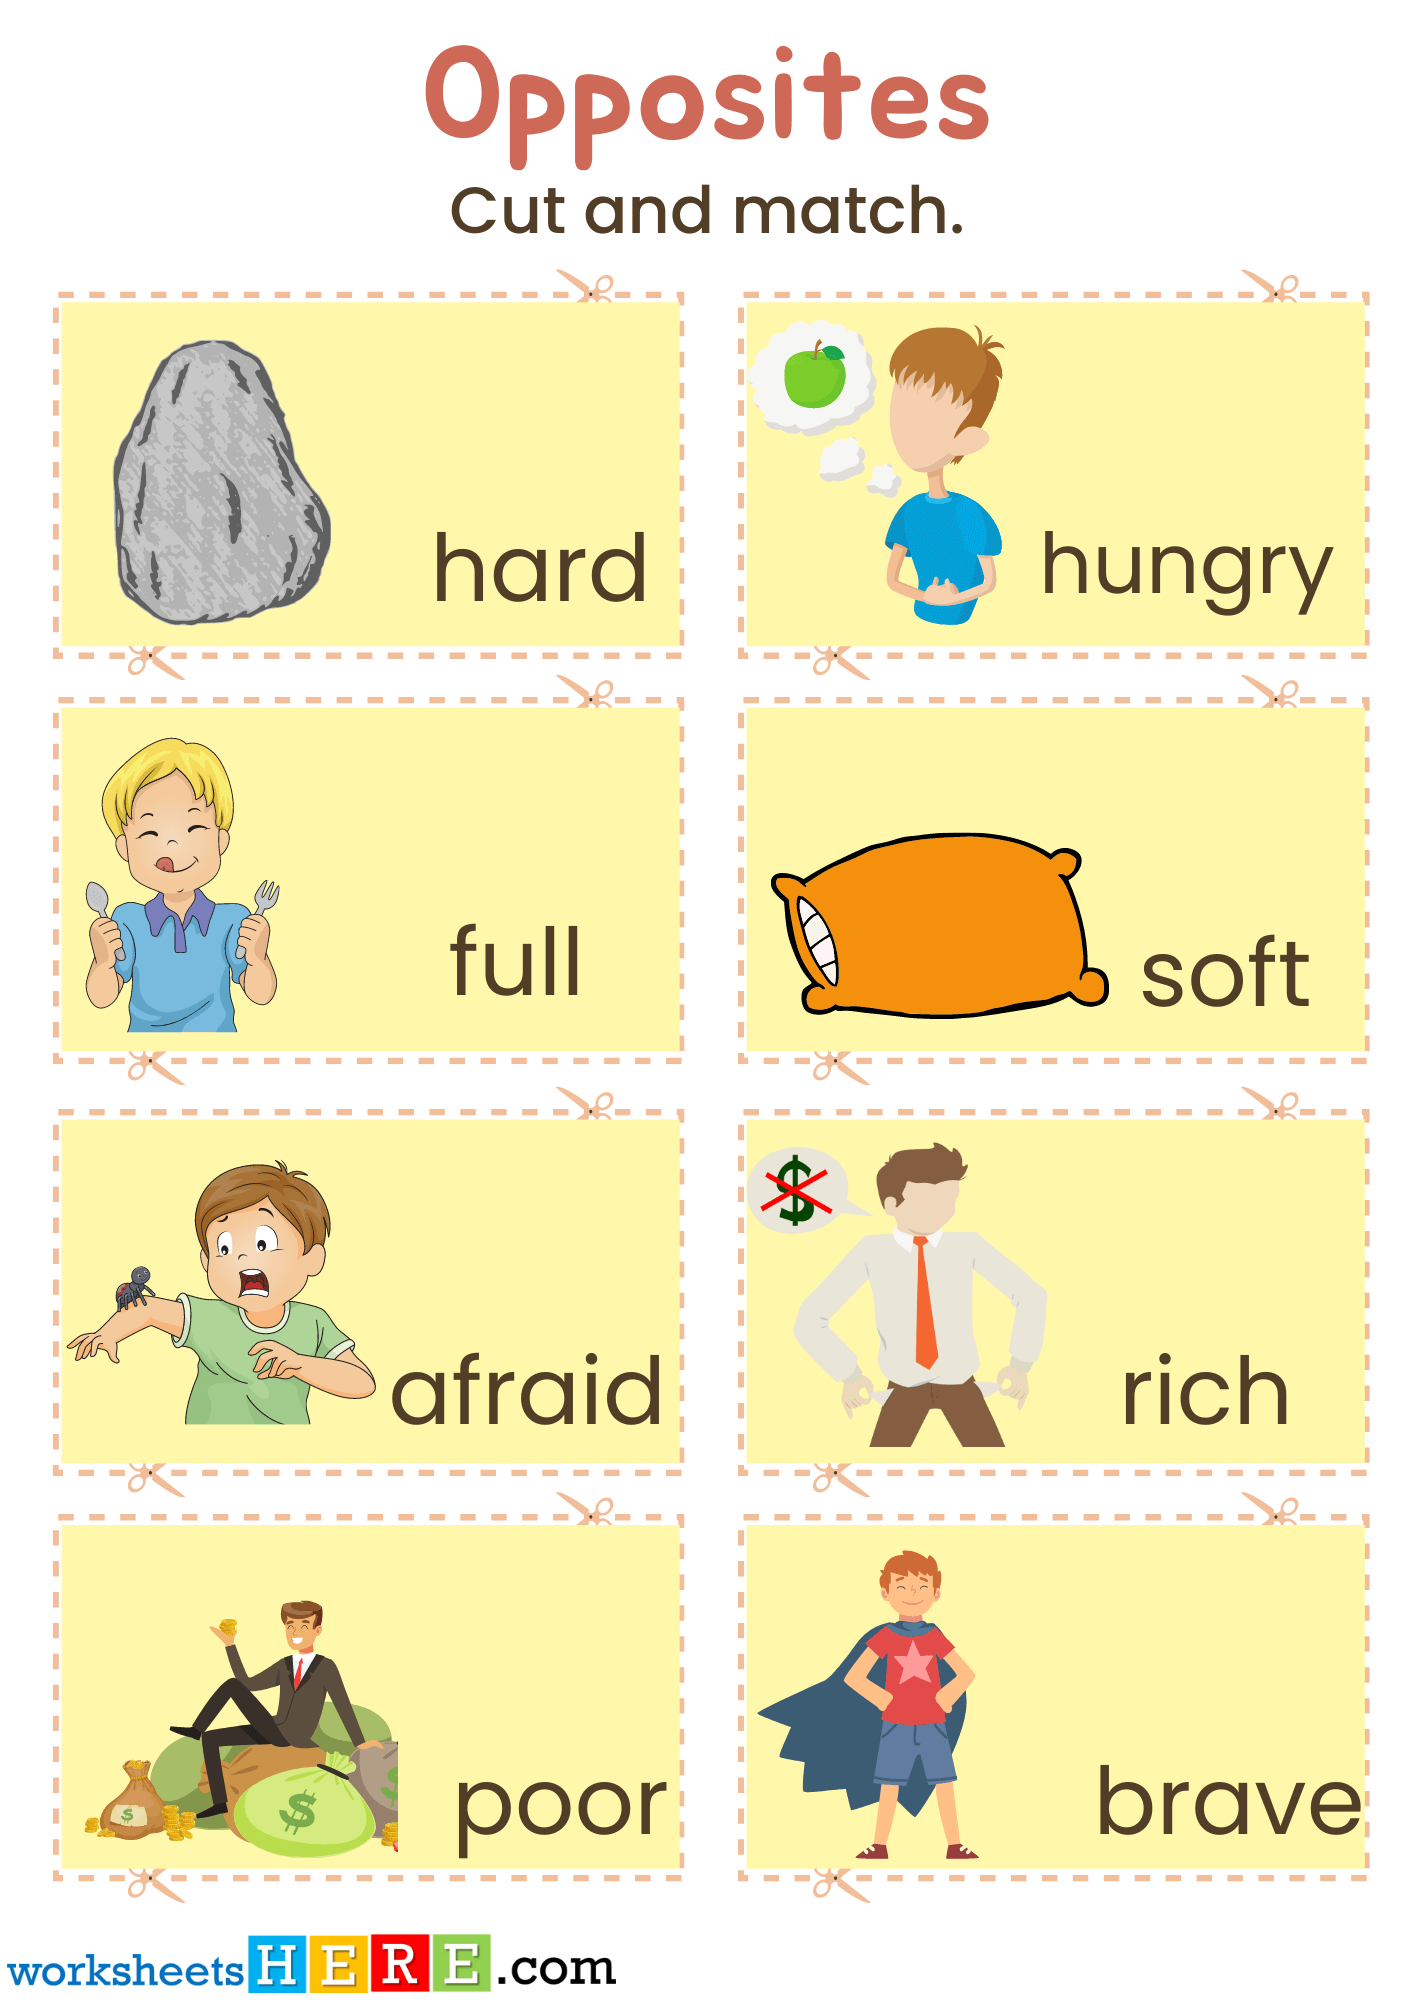 Cut and Match Opposite Words with Pictures PDF Worksheets For Kids